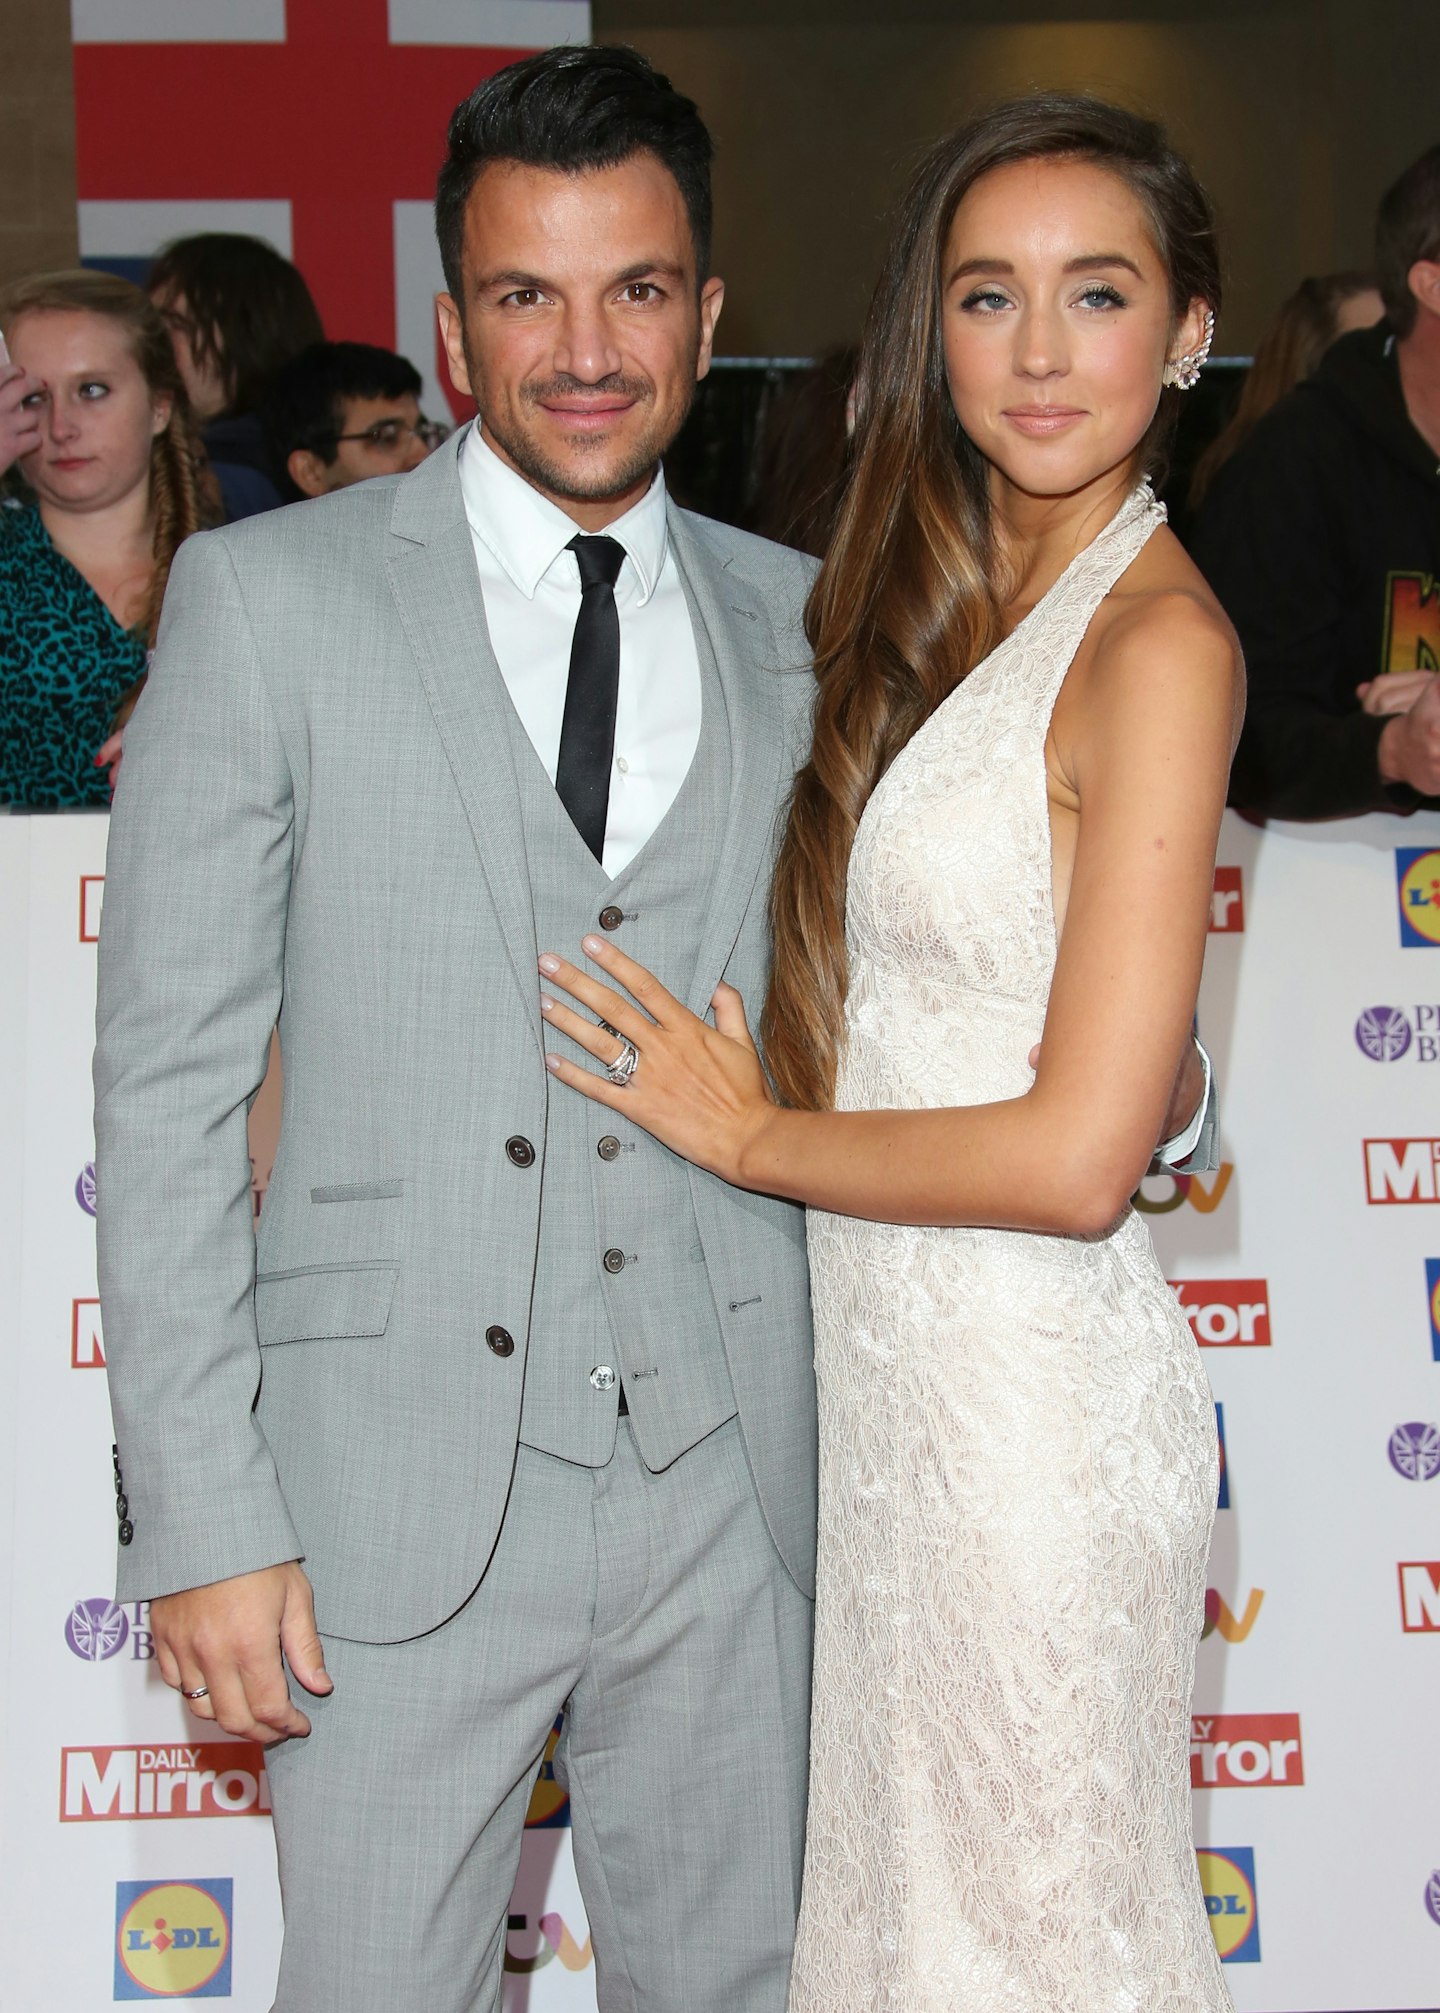 Peter Andre and Emily MacDonagh